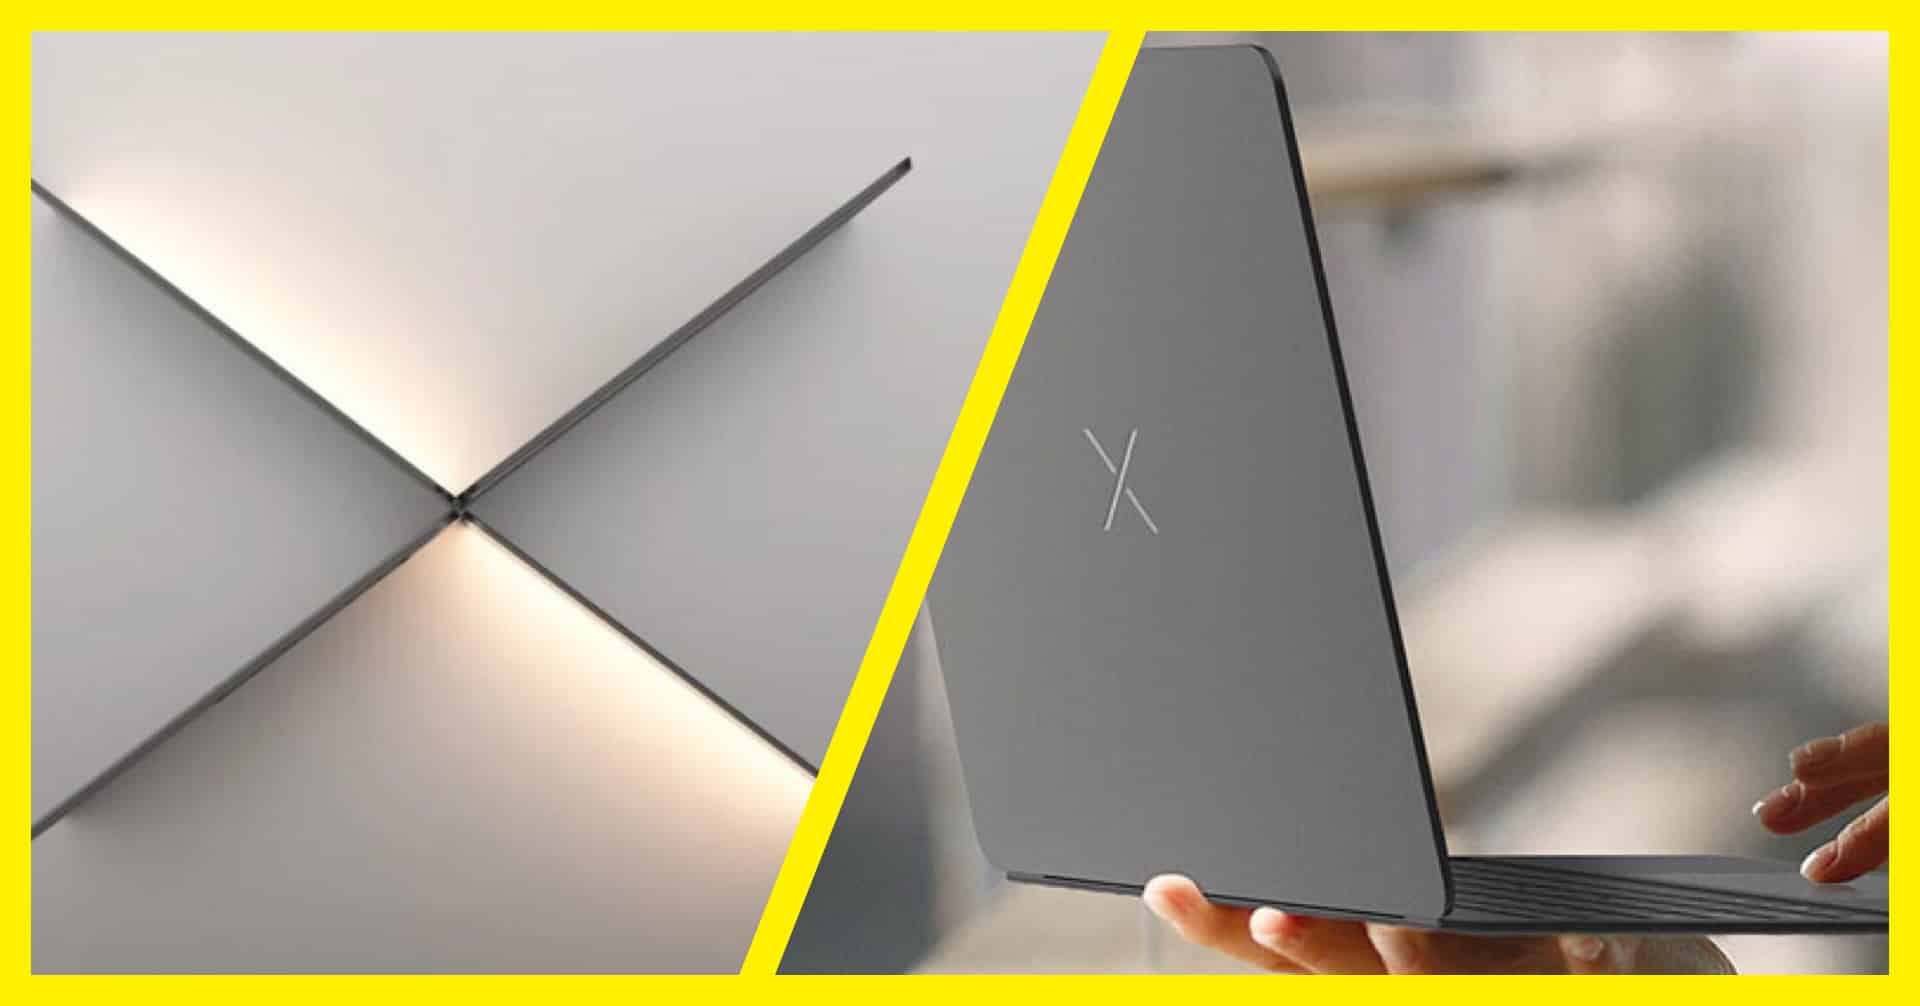 The Craob X Concept Laptop: A Thin, Lightweight Marvel of Technology